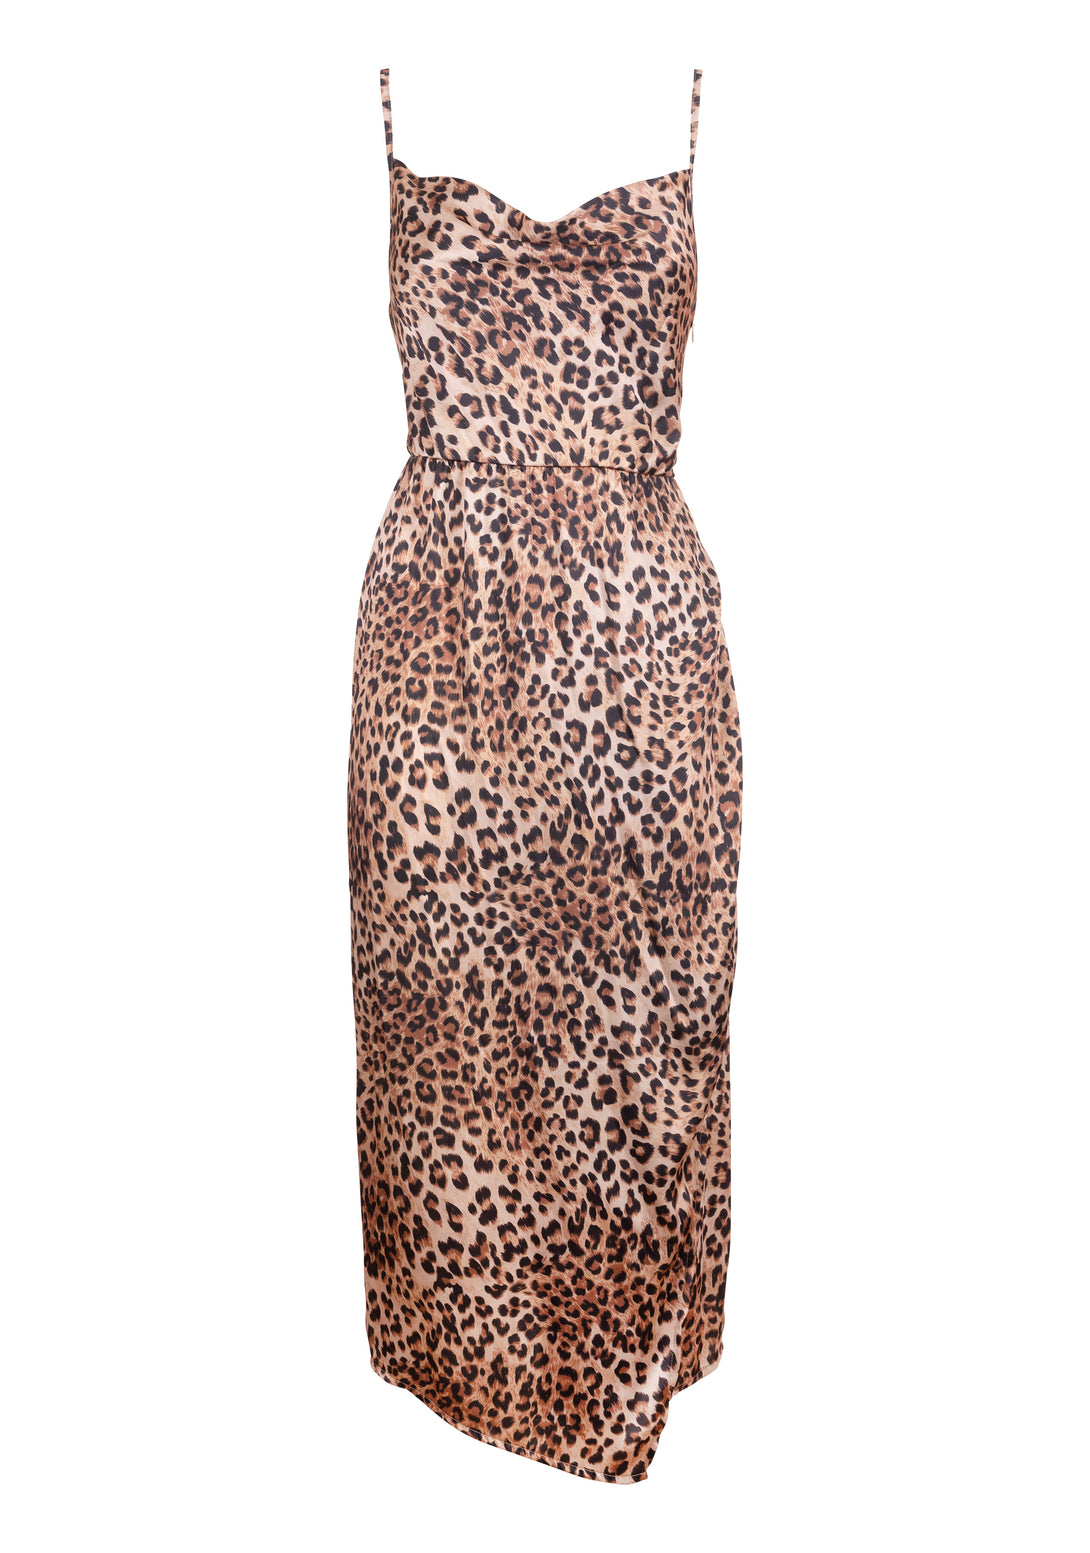 Sleeveless dress middle length made in satin with animalier pattern